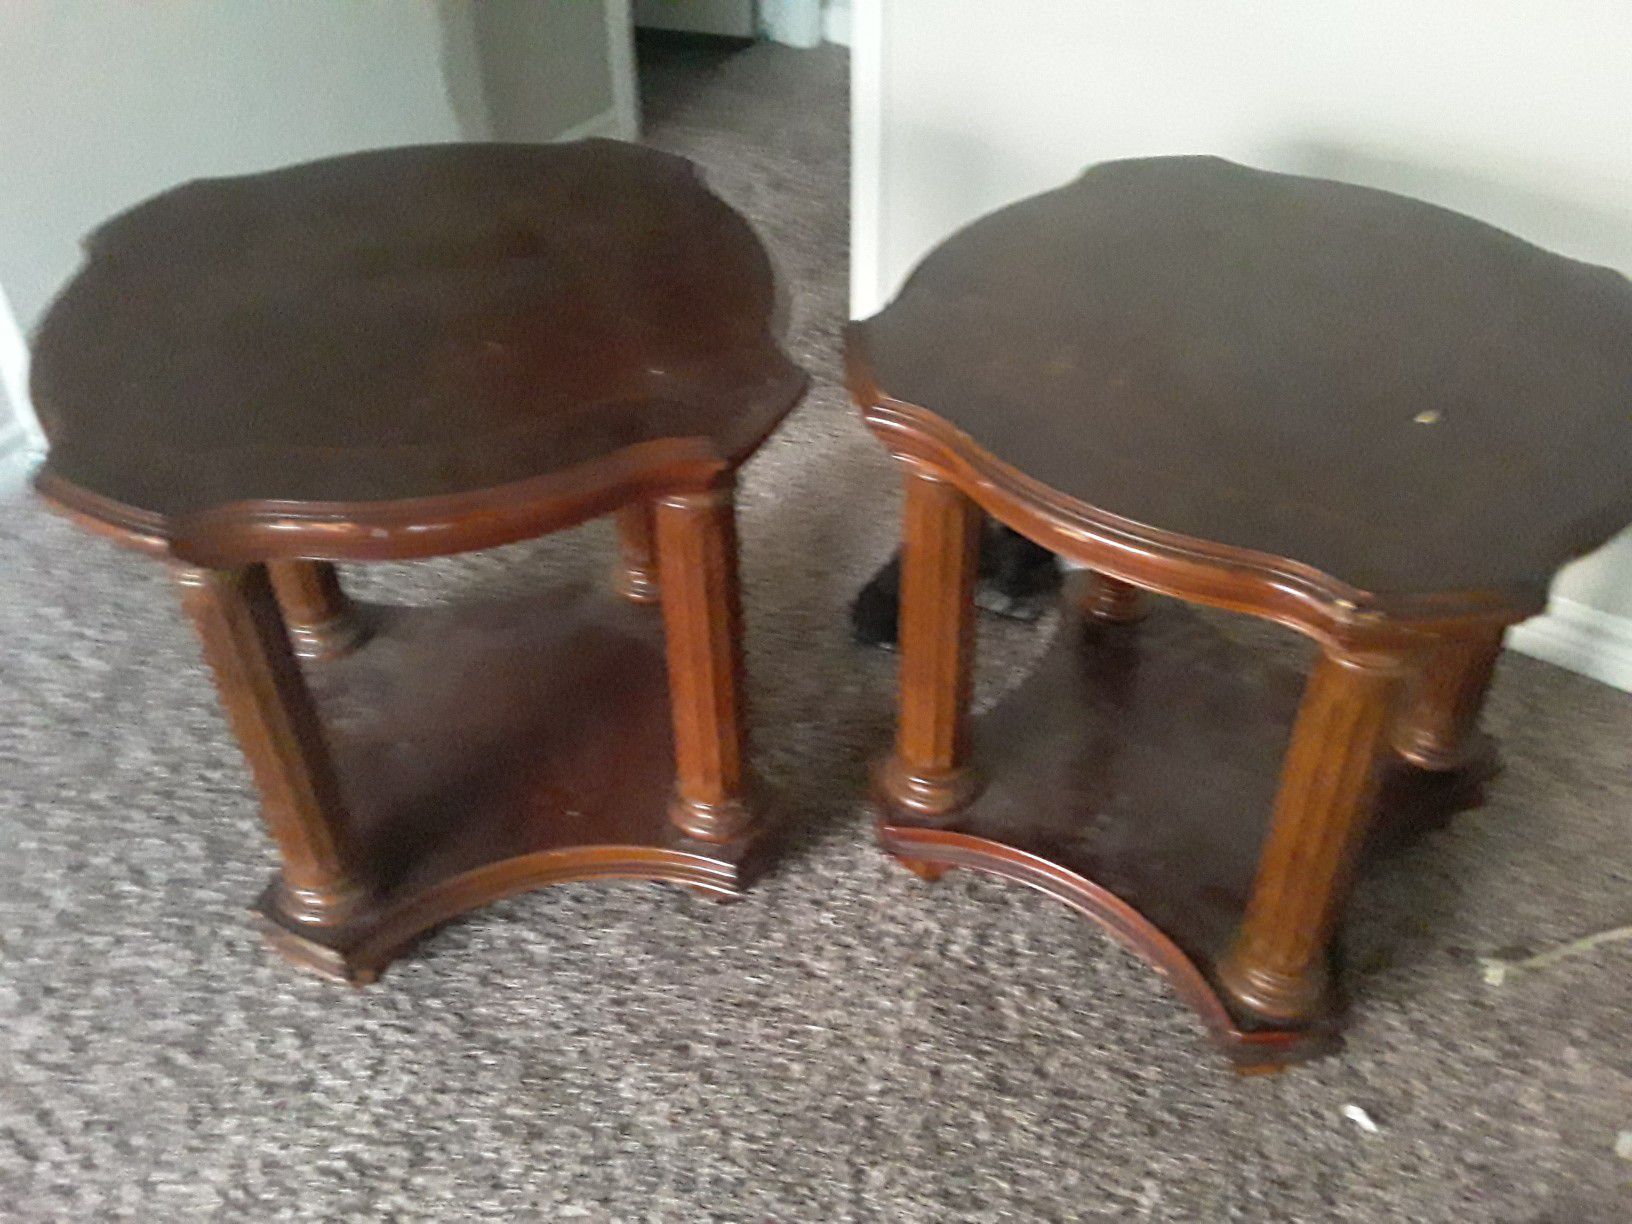 Two end tables